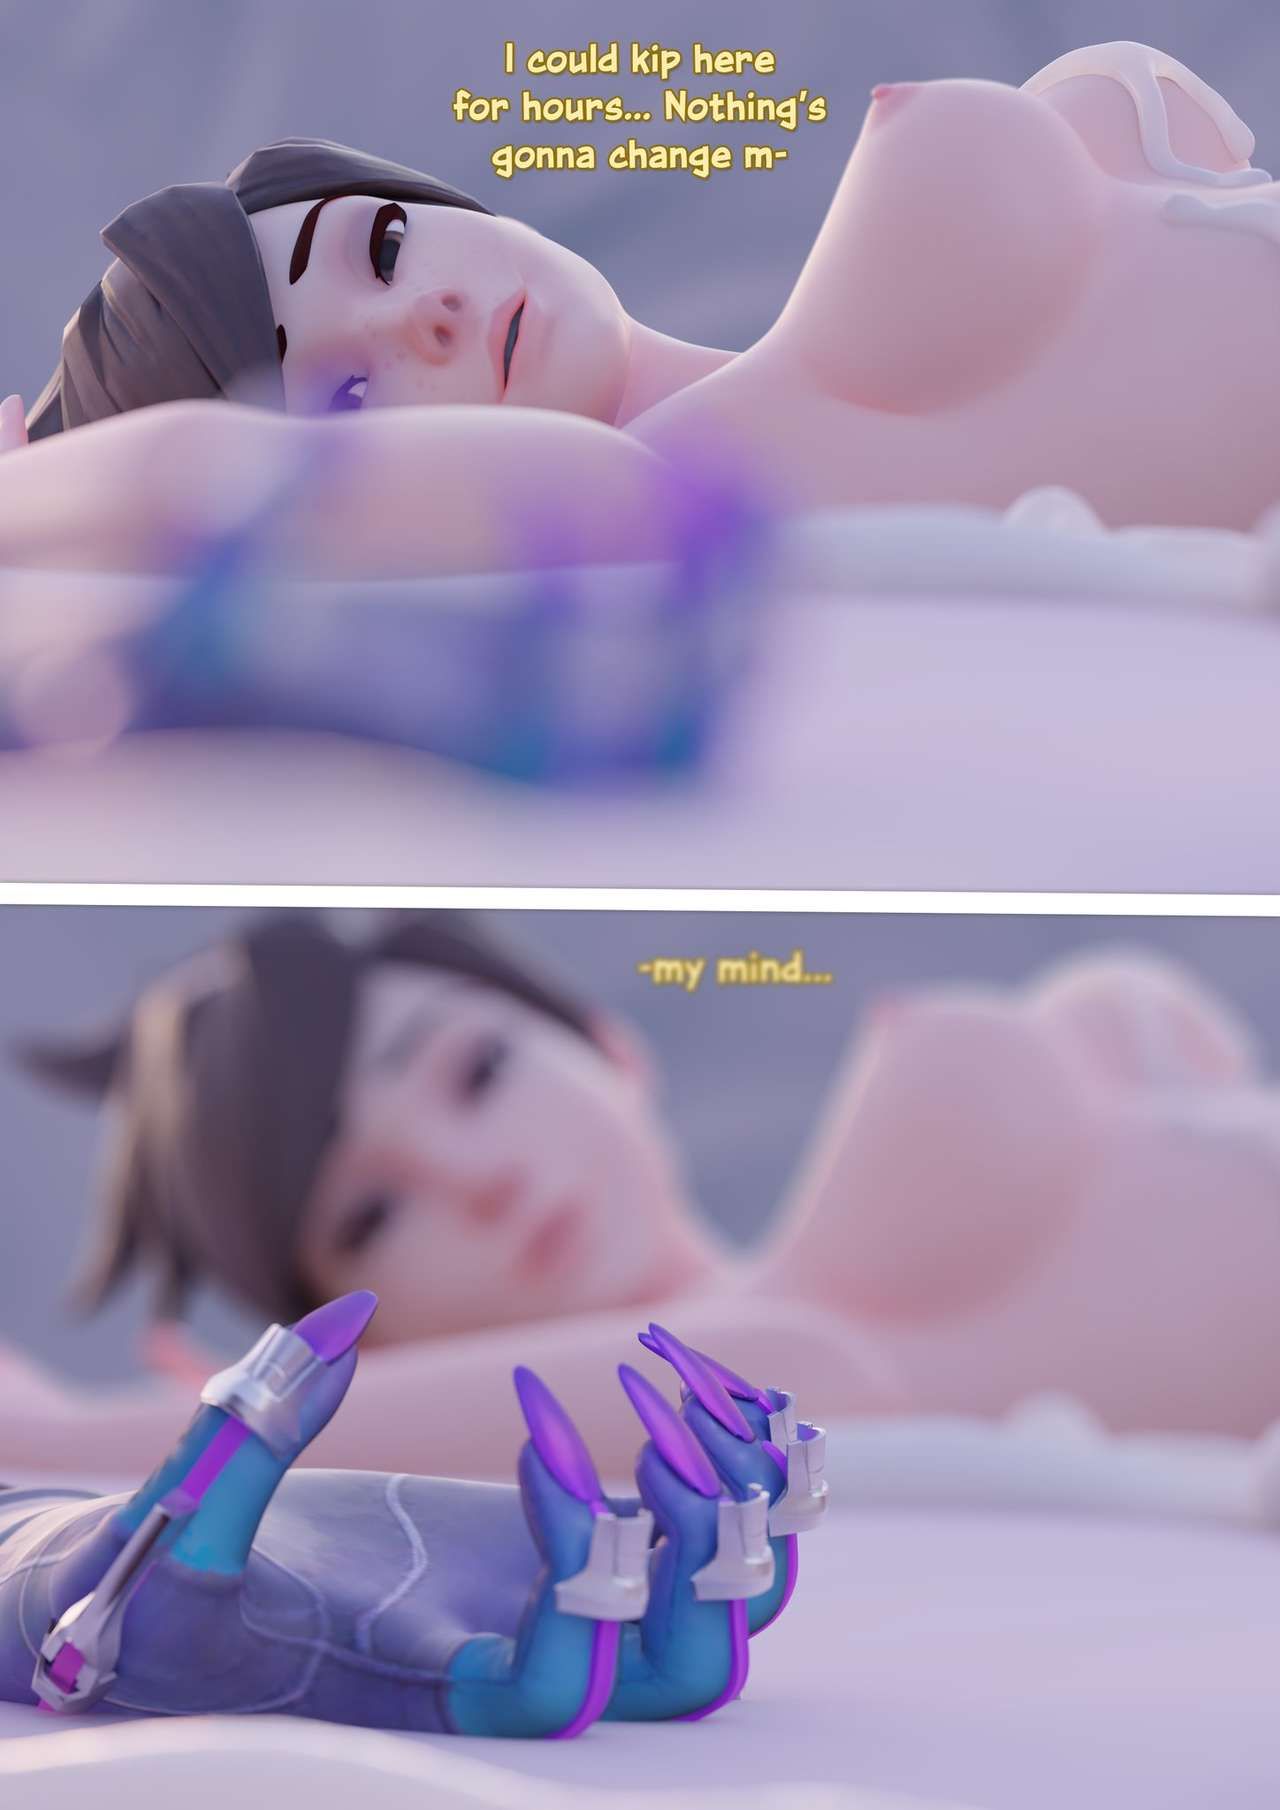 [Chainsmok3r] Tracer's No Nut November (Ongoing) 58